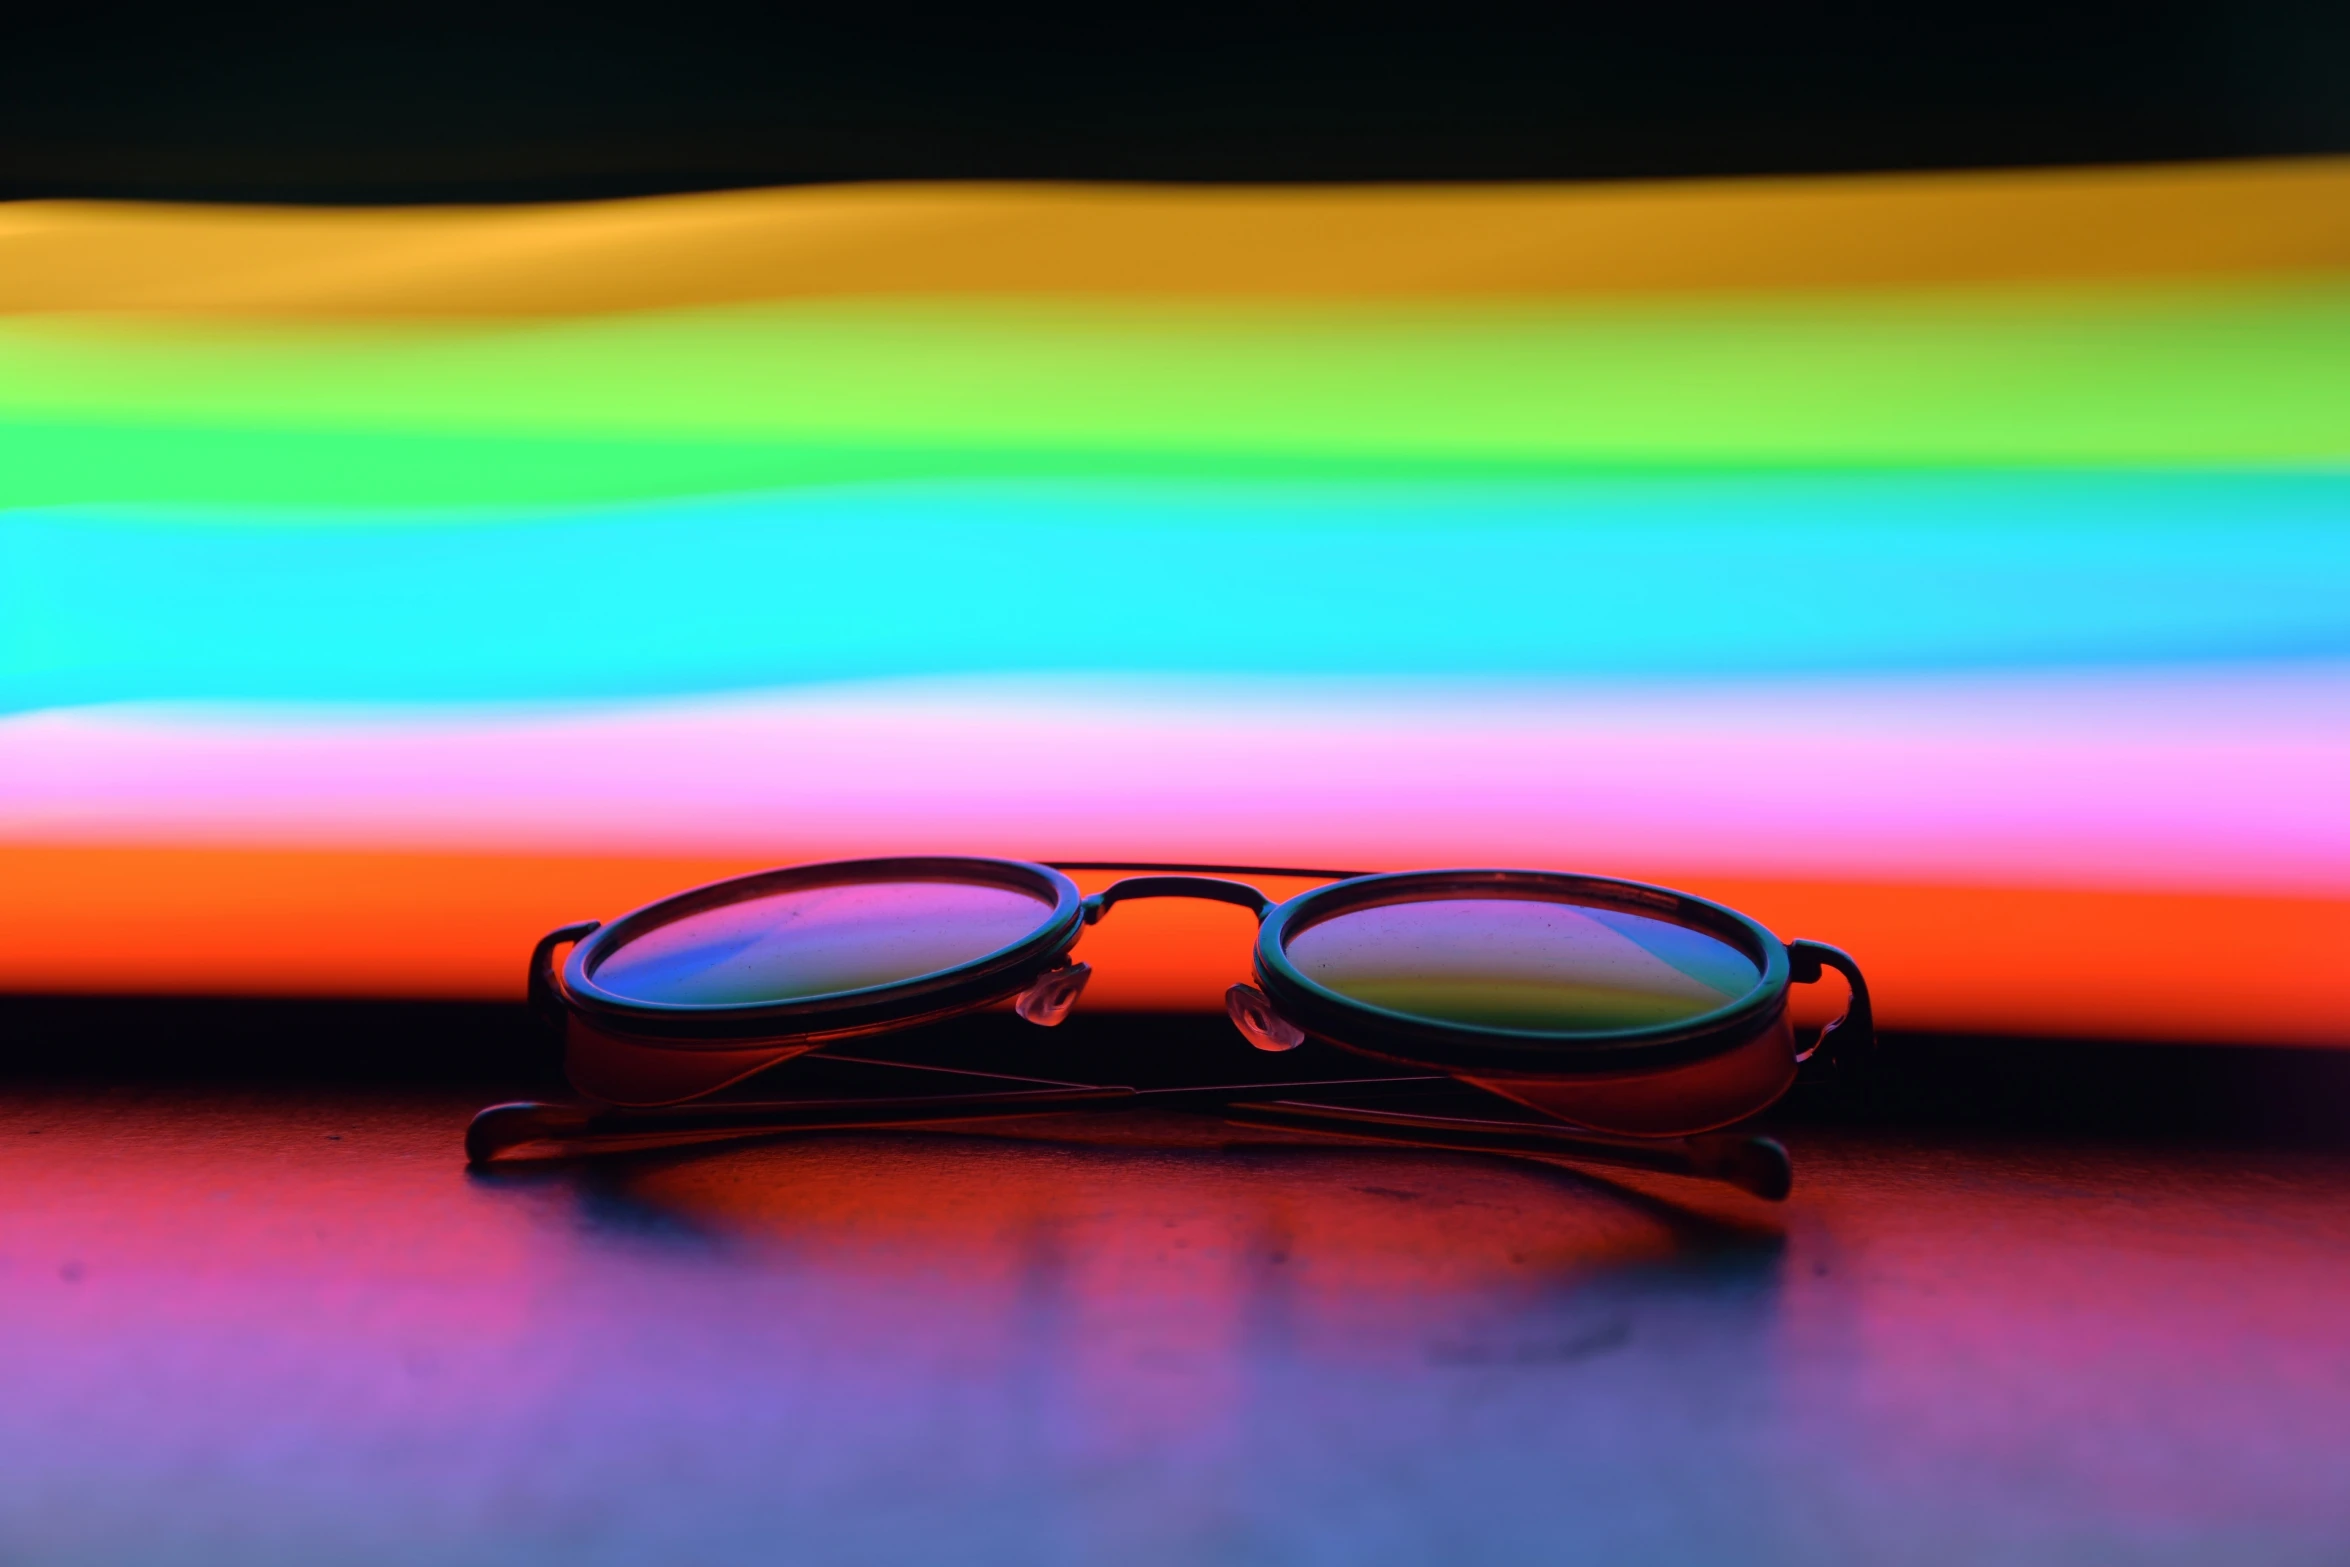 glasses resting on top of the table against a rainbow - striped background